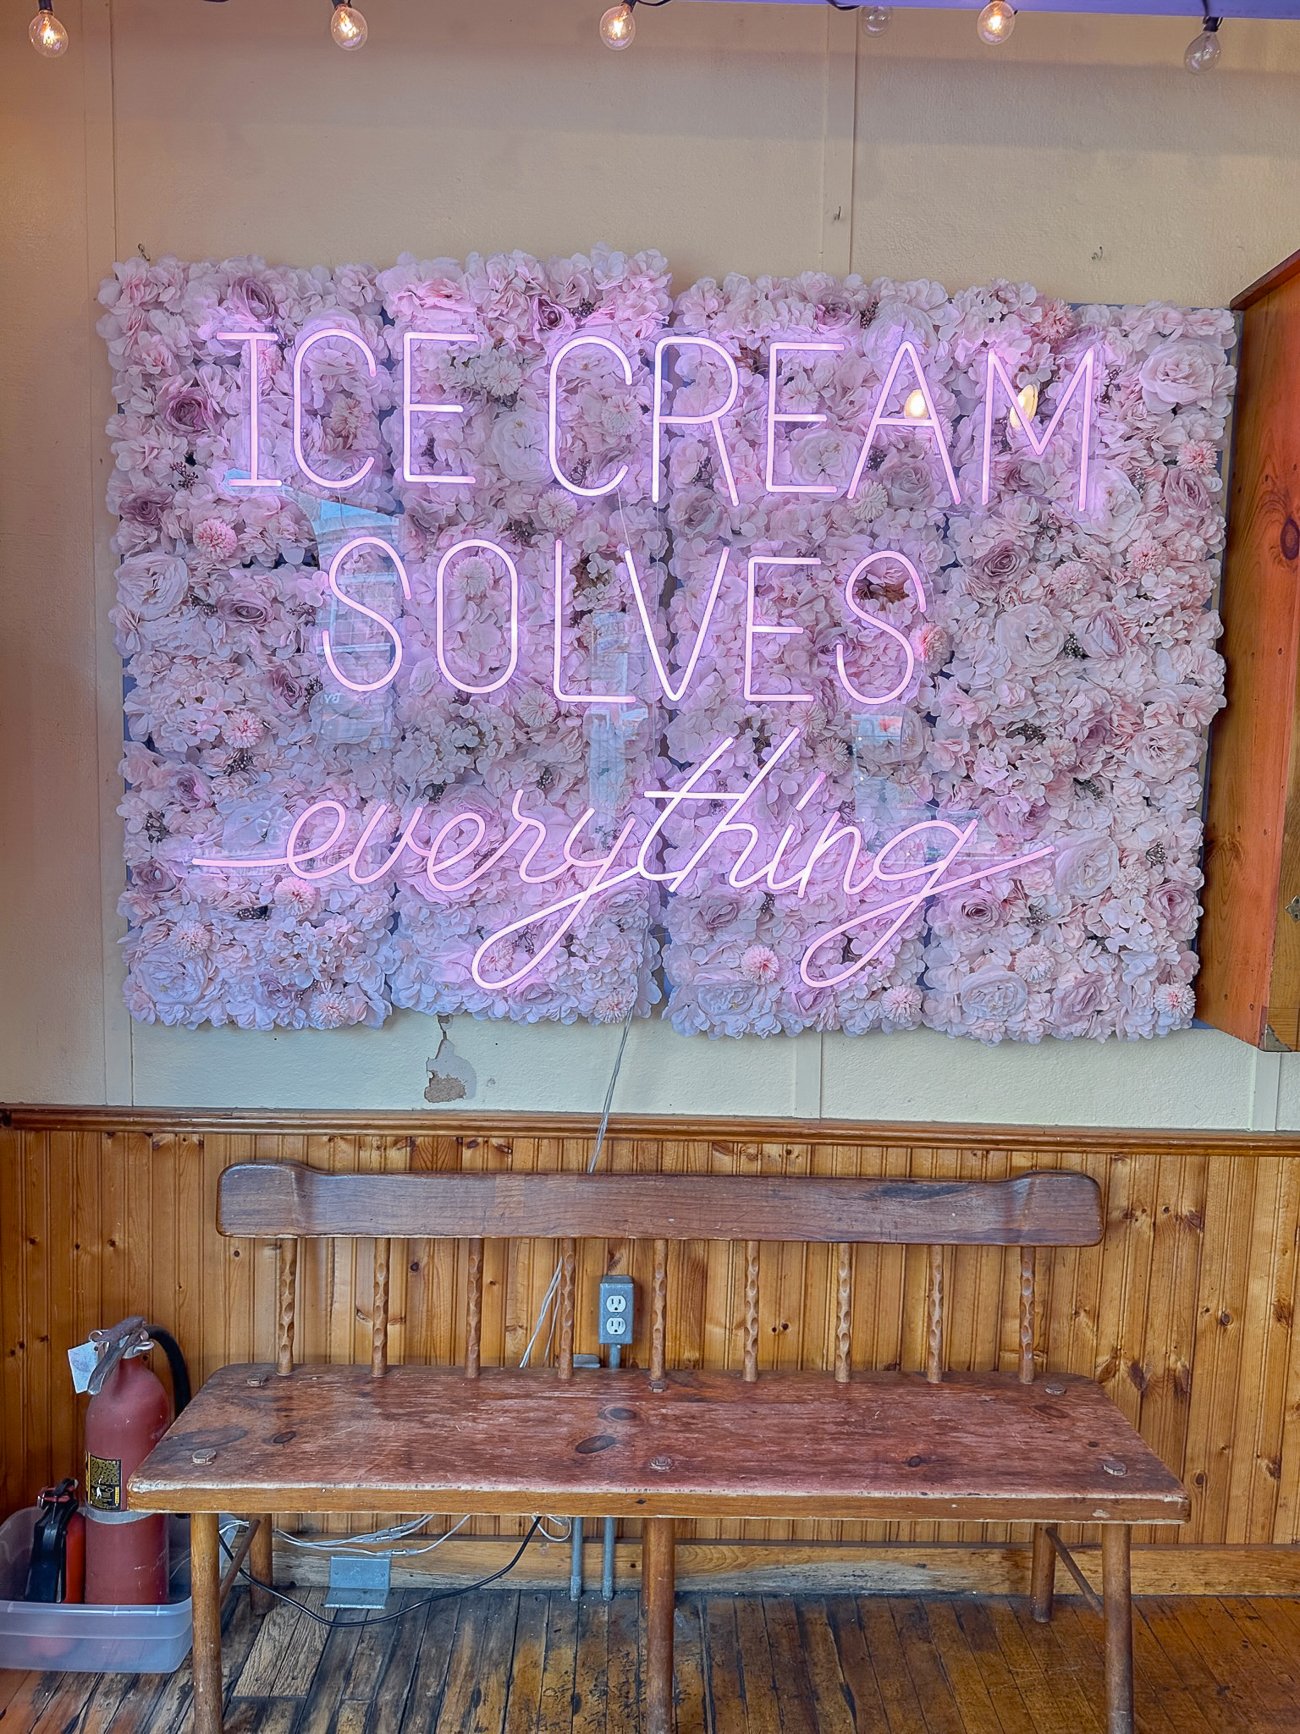 A neon sign that says "Ice Cream Solves everything" against flowers